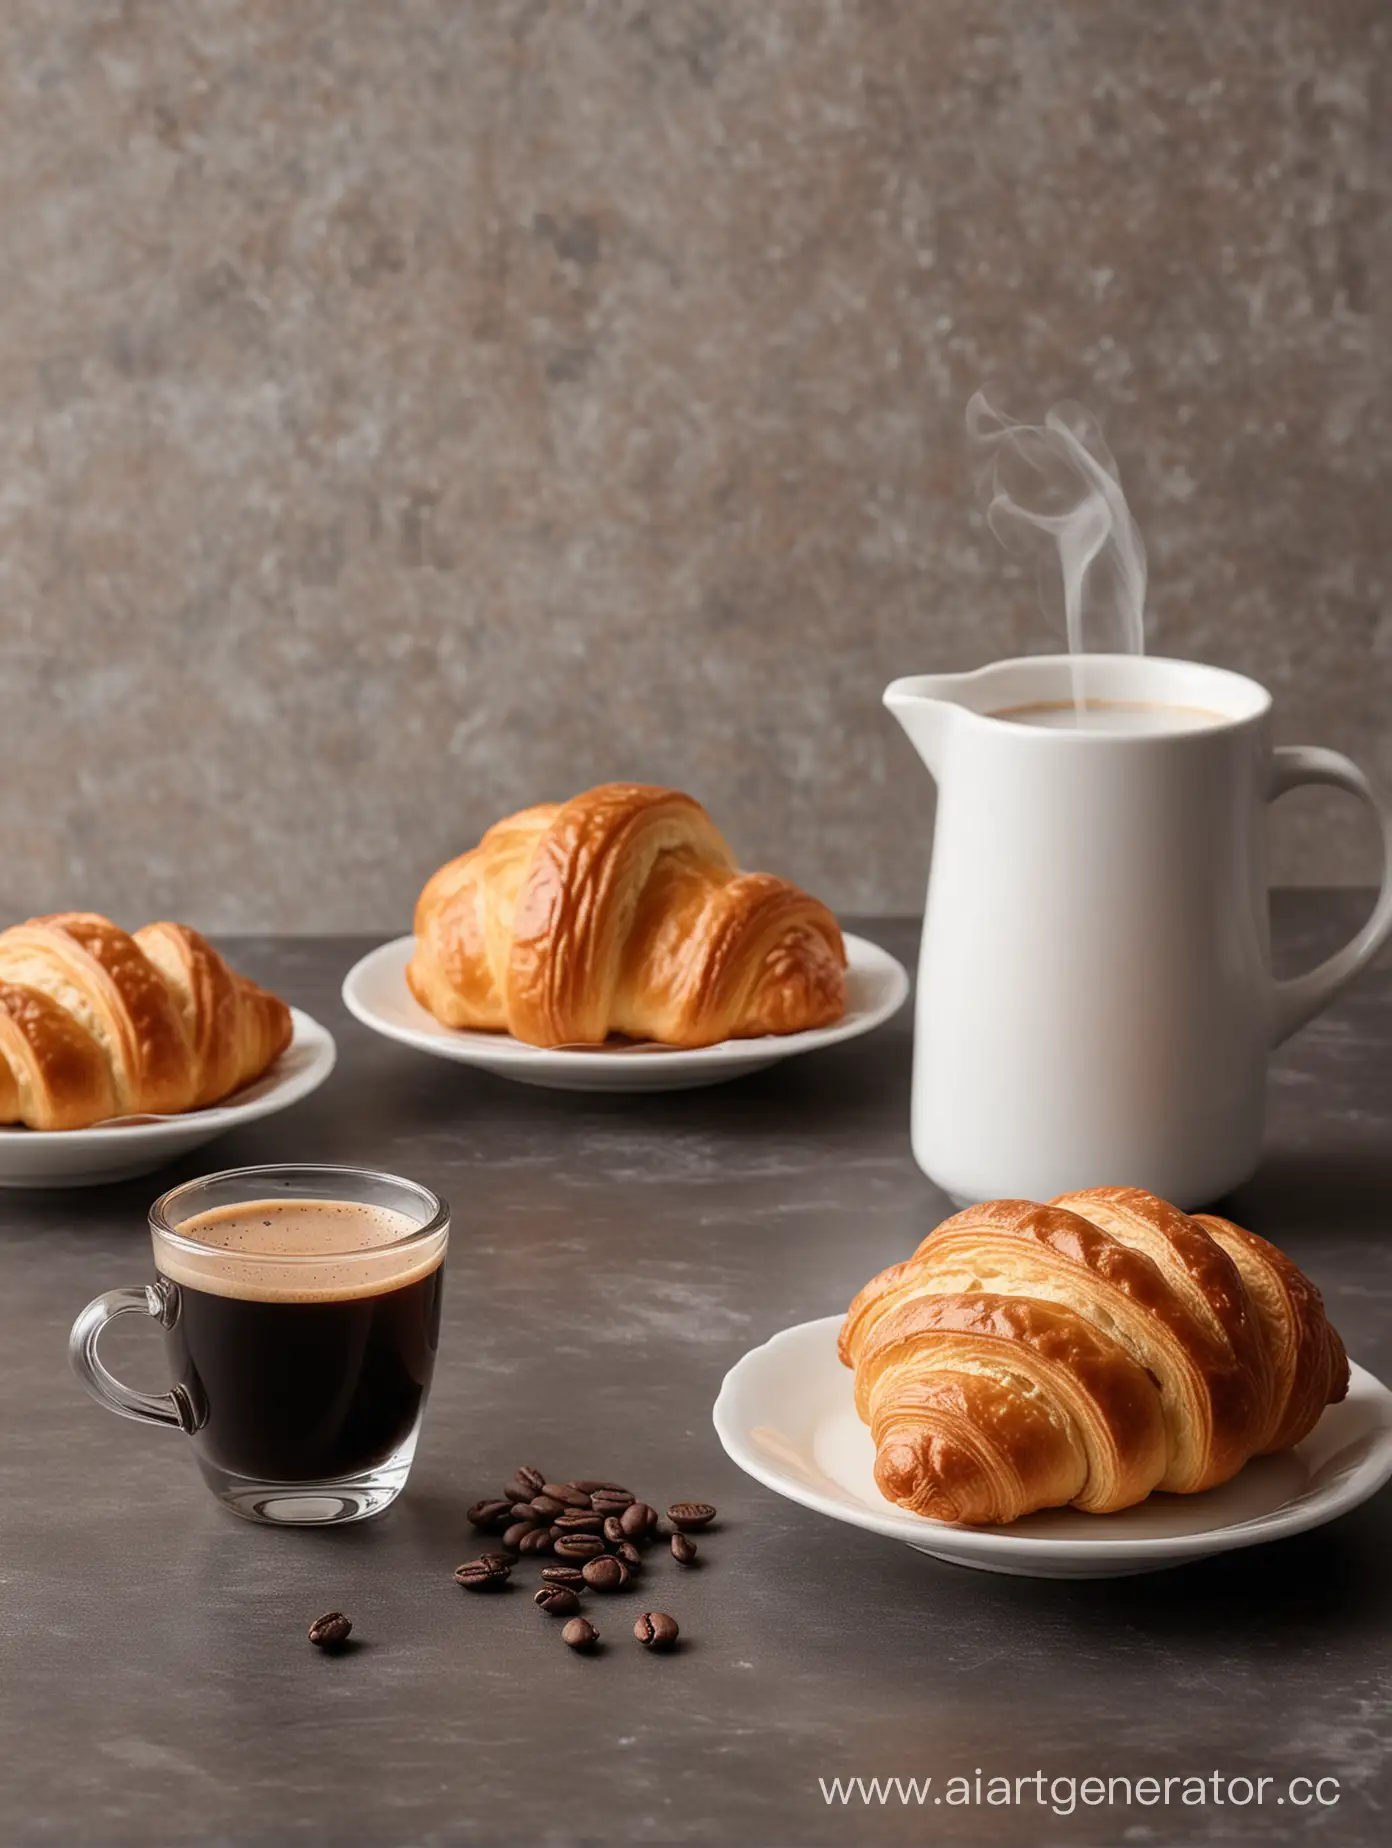 Cozy-Morning-Breakfast-Scene-with-Aromatic-Diffuser-Coffee-and-Croissant